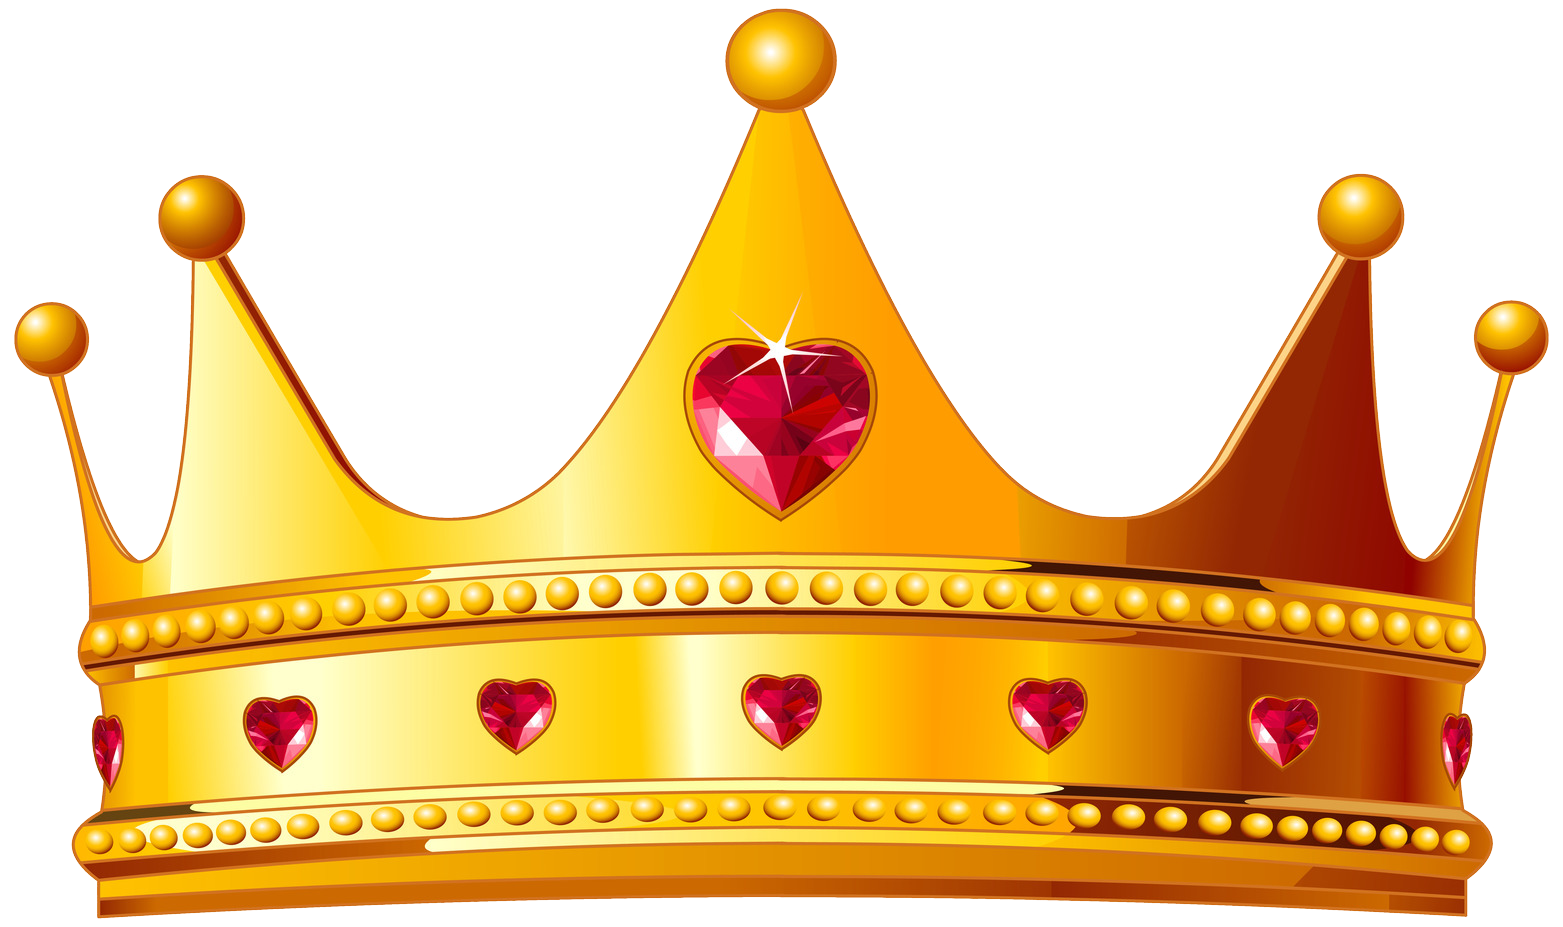 King Crown Png Clipart Bbcper